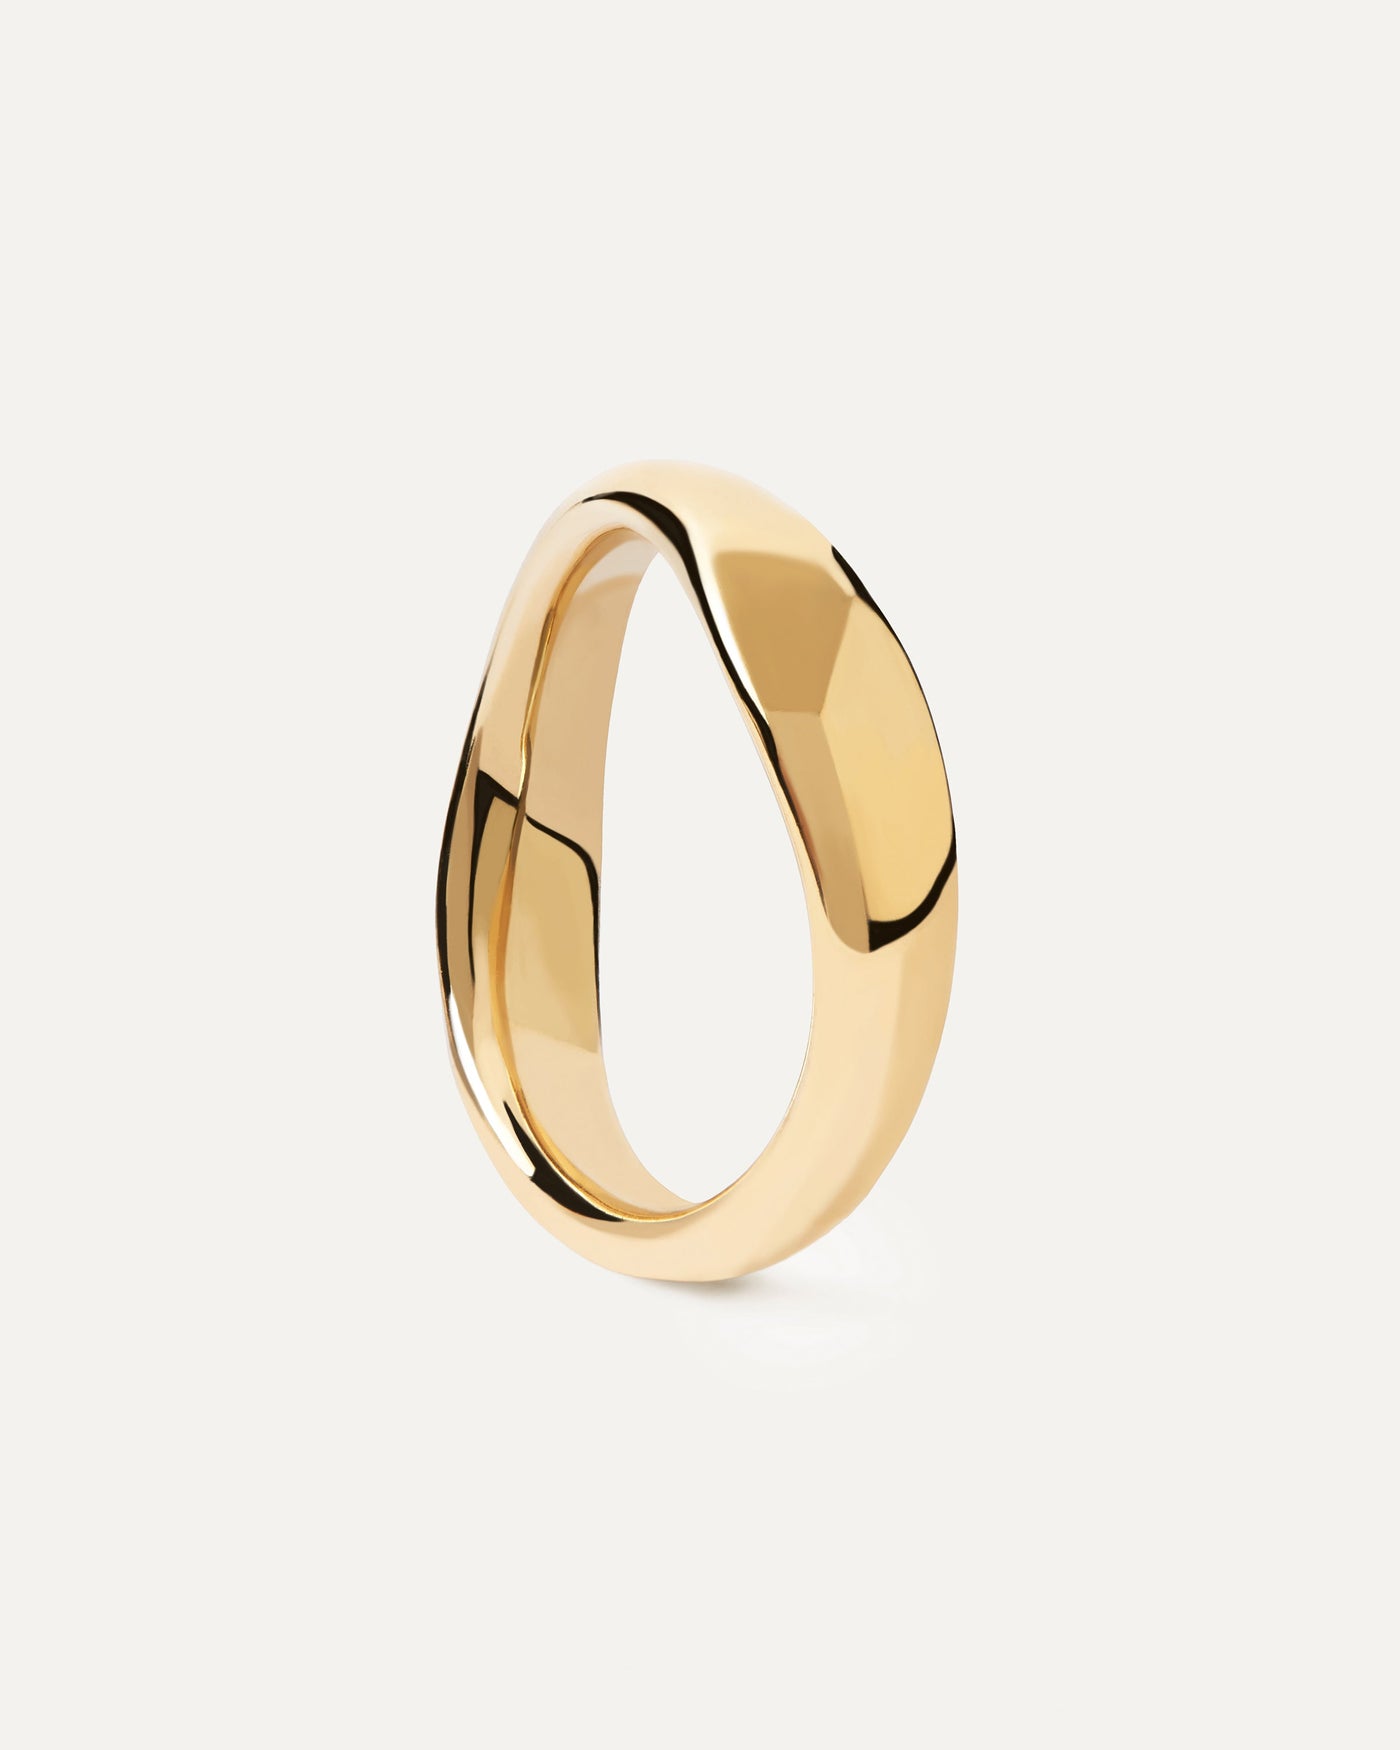 2023 Selection | Pirouette Ring. Gold-plated silver ring with bold and curvy design. Get the latest arrival from PDPAOLA. Place your order safely and get this Best Seller. Free Shipping.